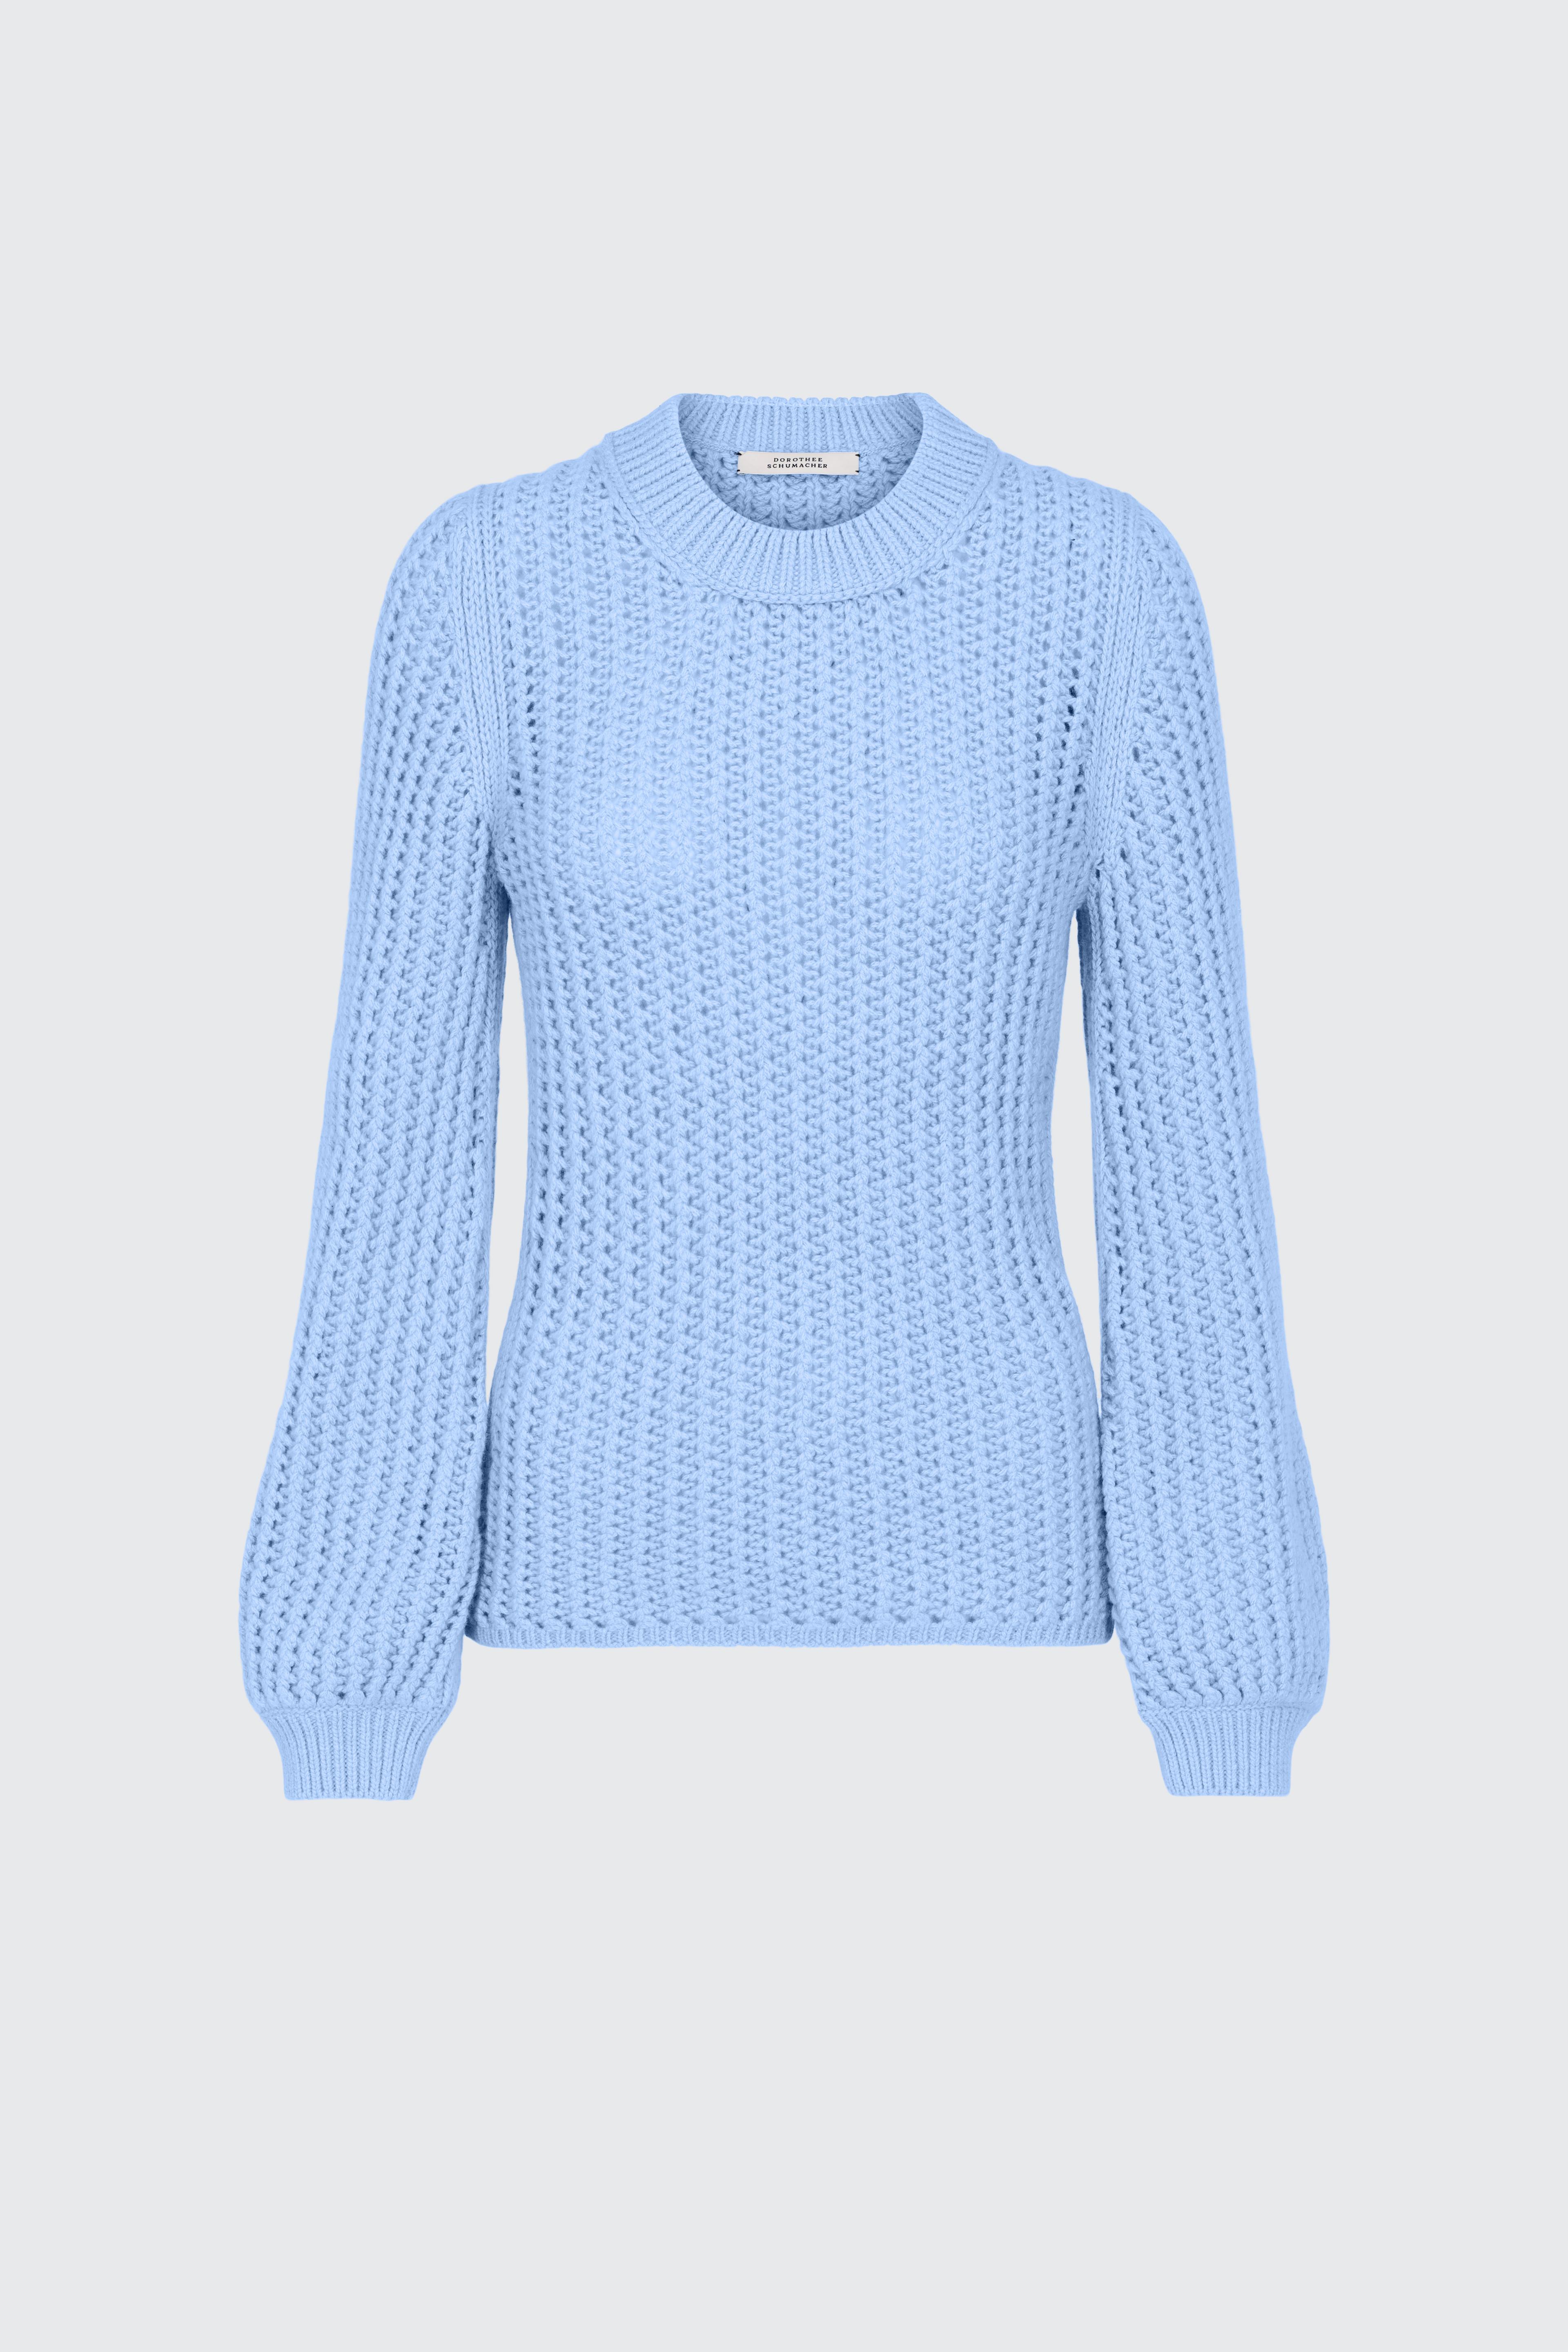 Dorothee Schumacher Cashmere Bold Silhouettes Pullover in Blue | Lyst